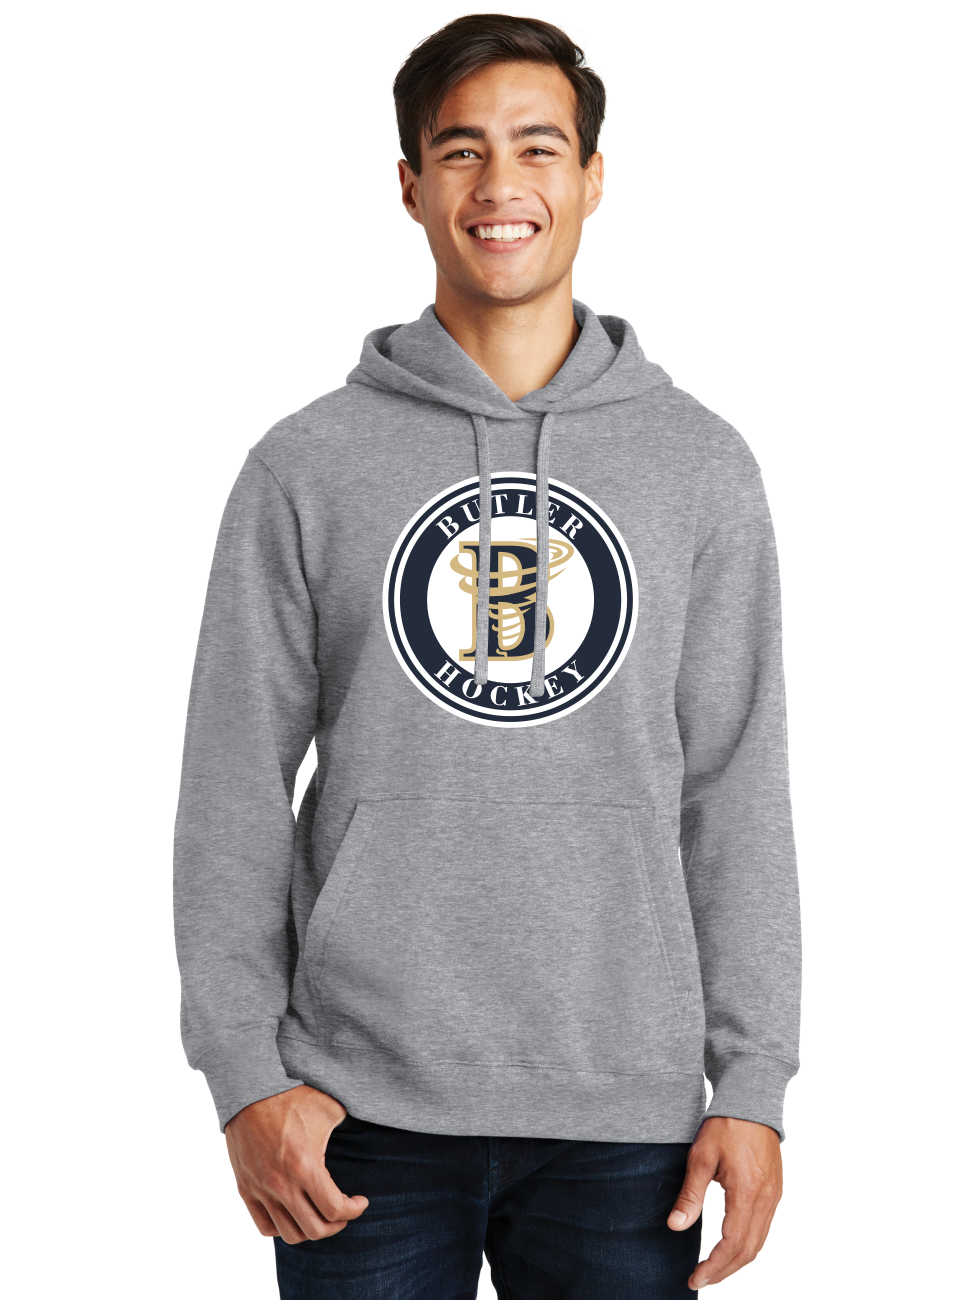 Logo Hoodie - Butler - Multiple Colors Available